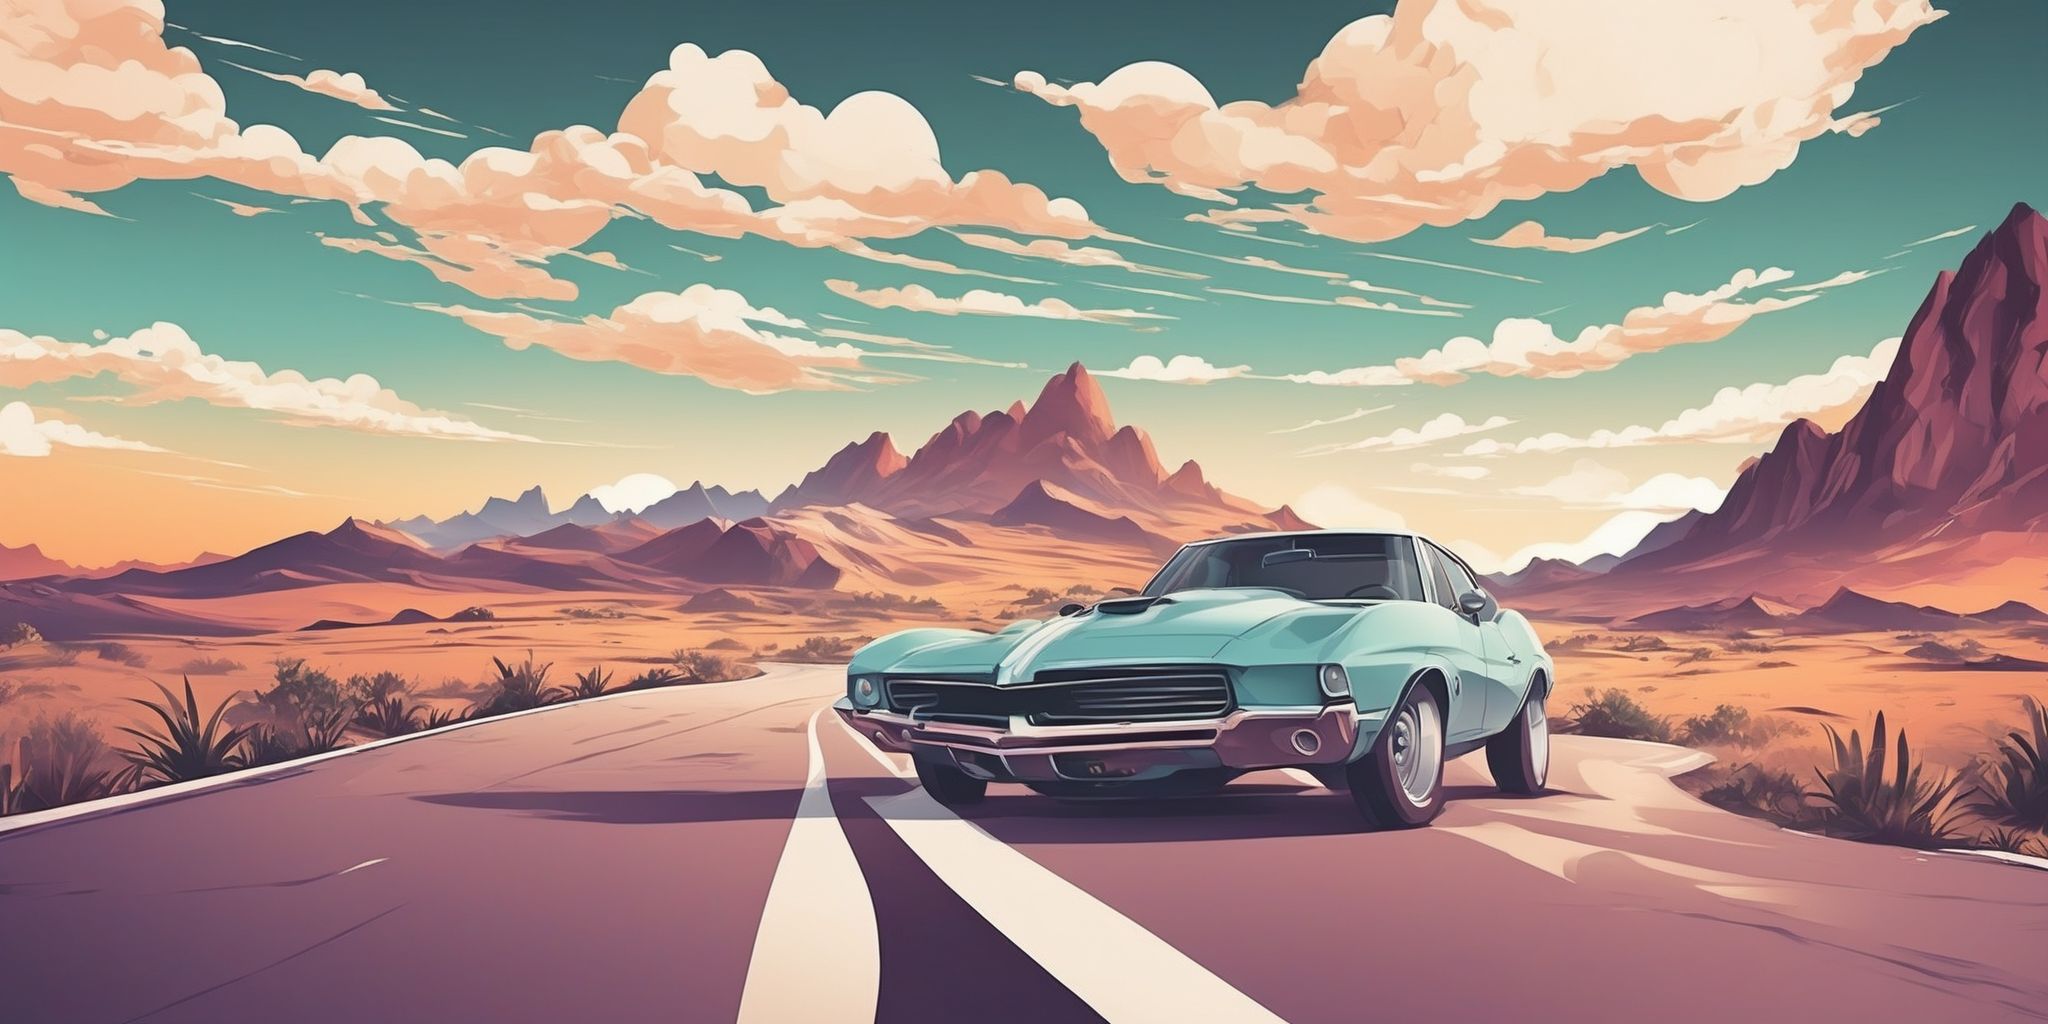 Conversion highway in illustration style with gradients and white background